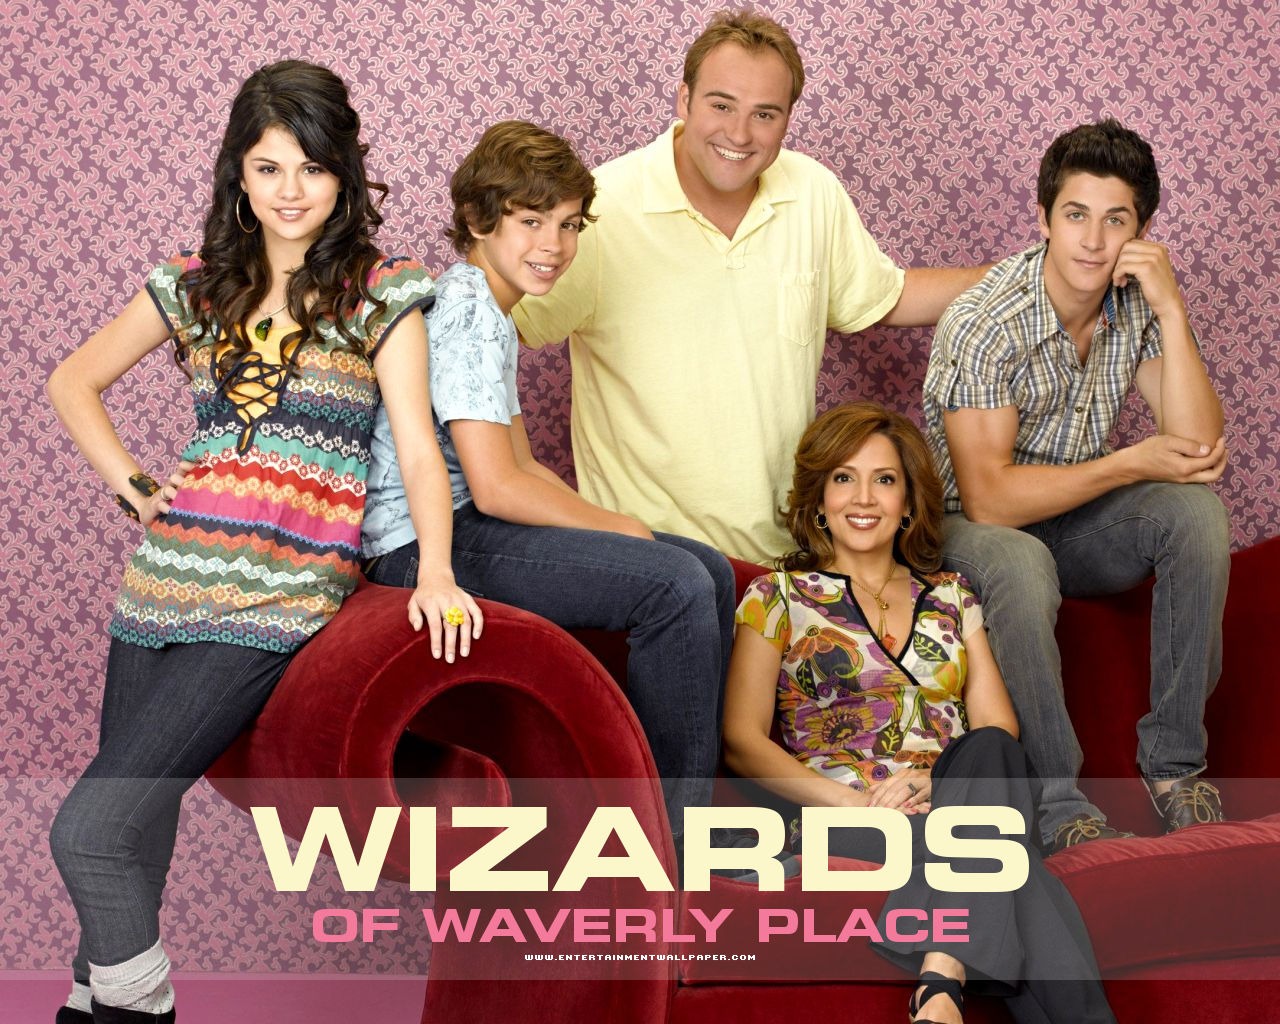 Wizards of Waverly Place wallpaper #1 - 1280x1024